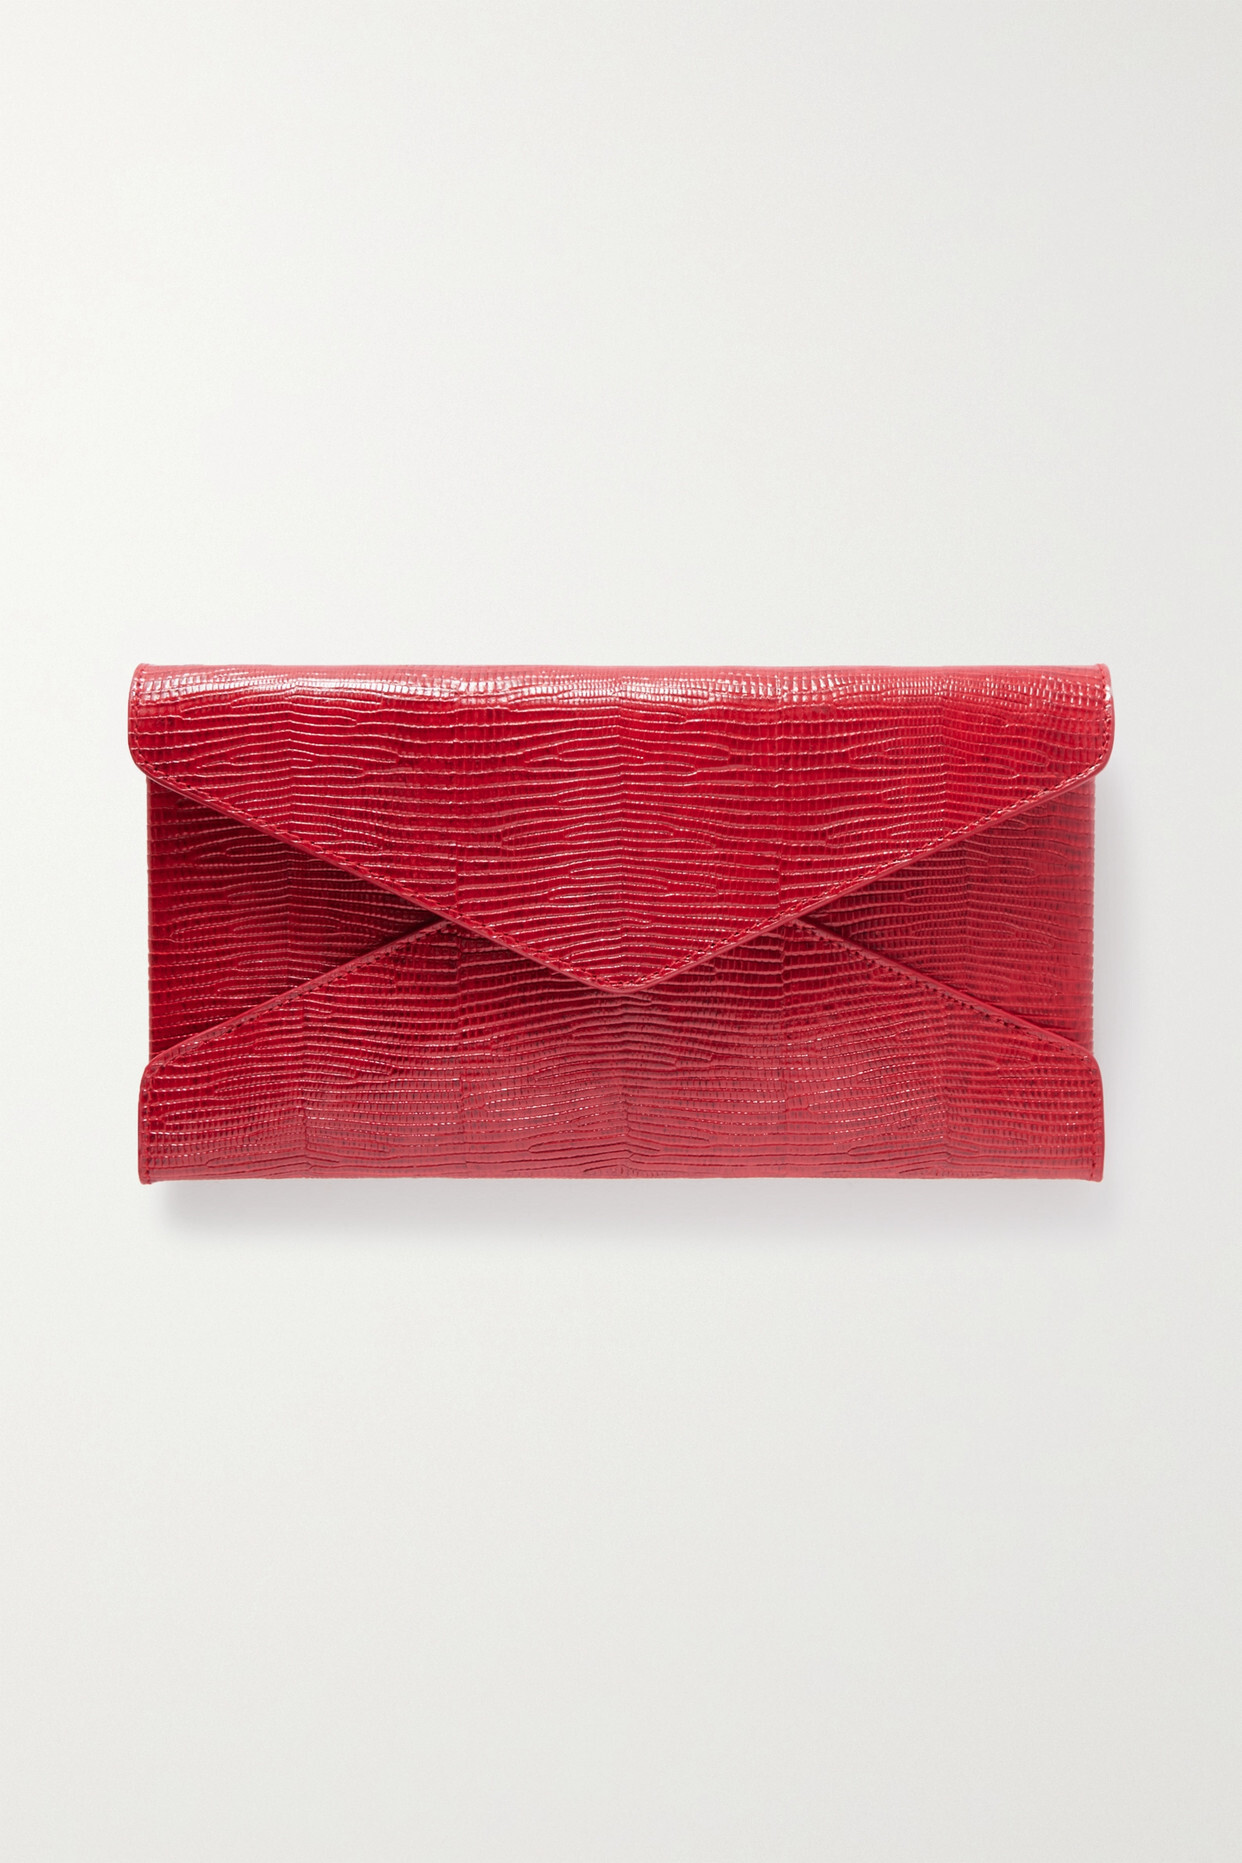 SAINT LAURENT - Monogramme Lizard-effect Leather Pouch - Red